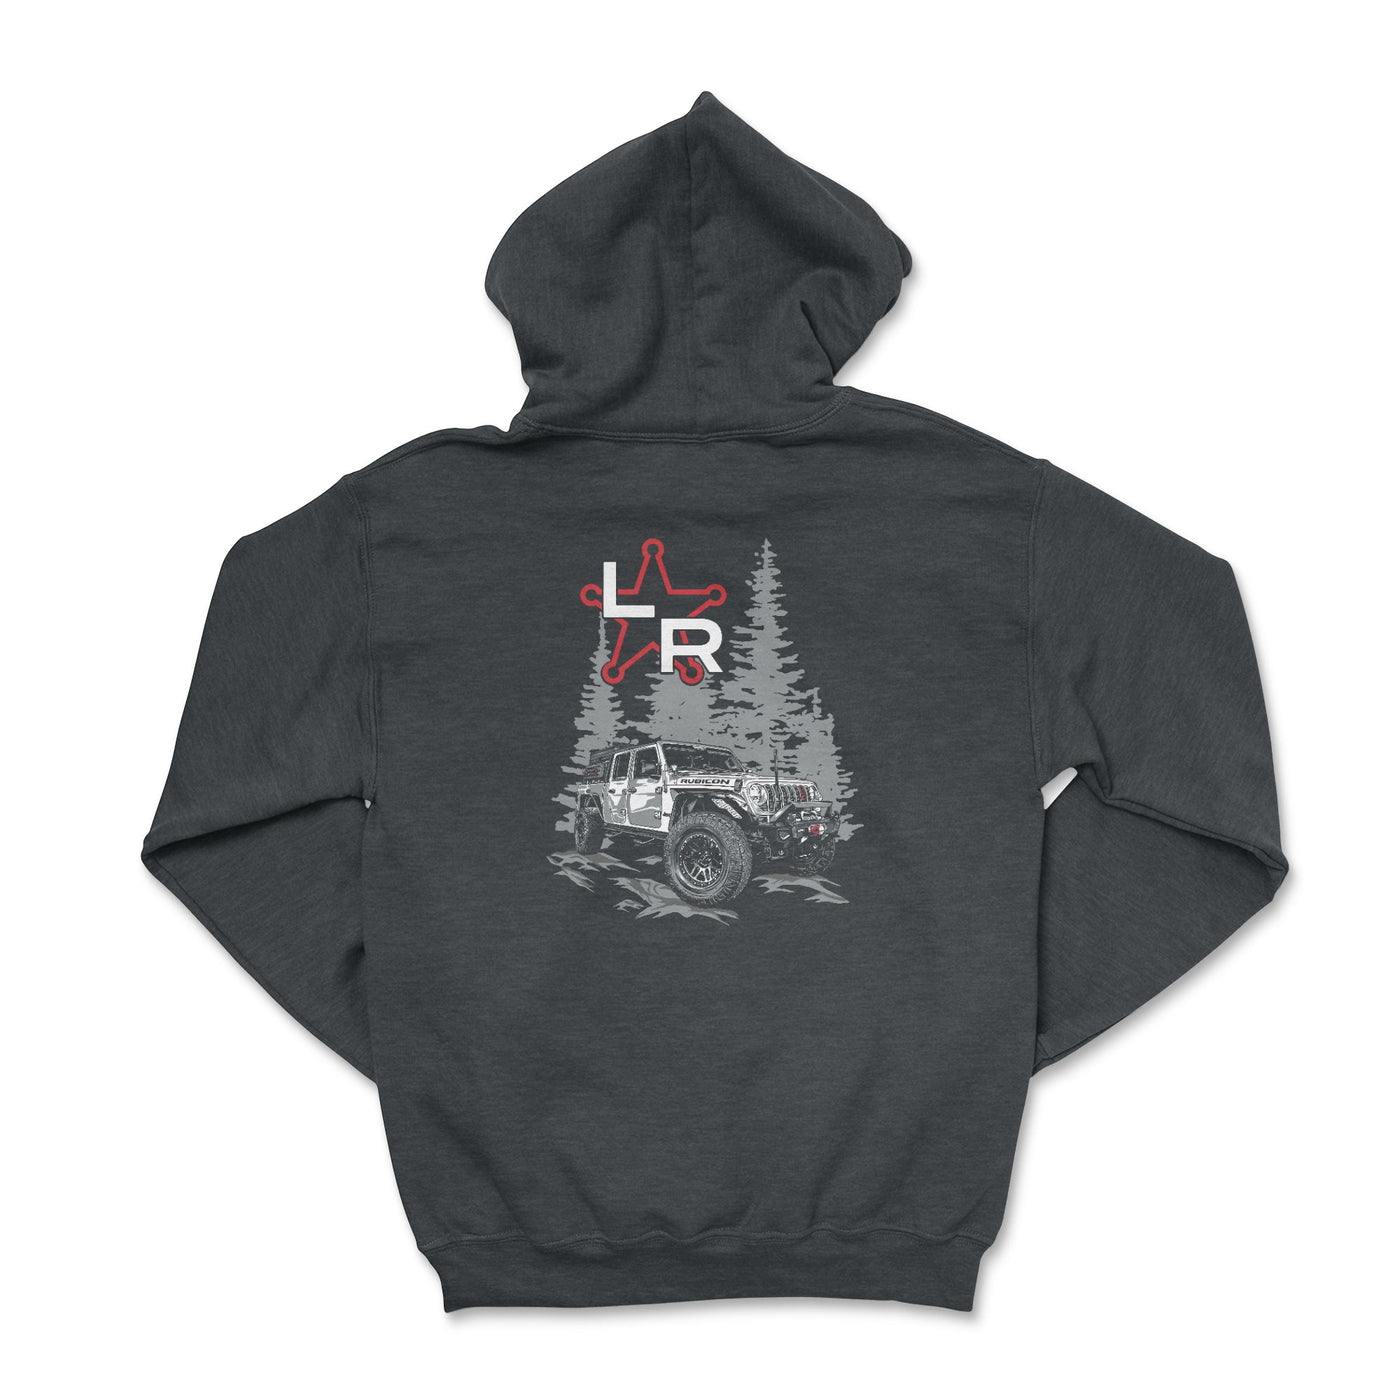 Lone Rubicon Offroad Lifestyle Hoodie - Goats Trail Off-Road Apparel Company